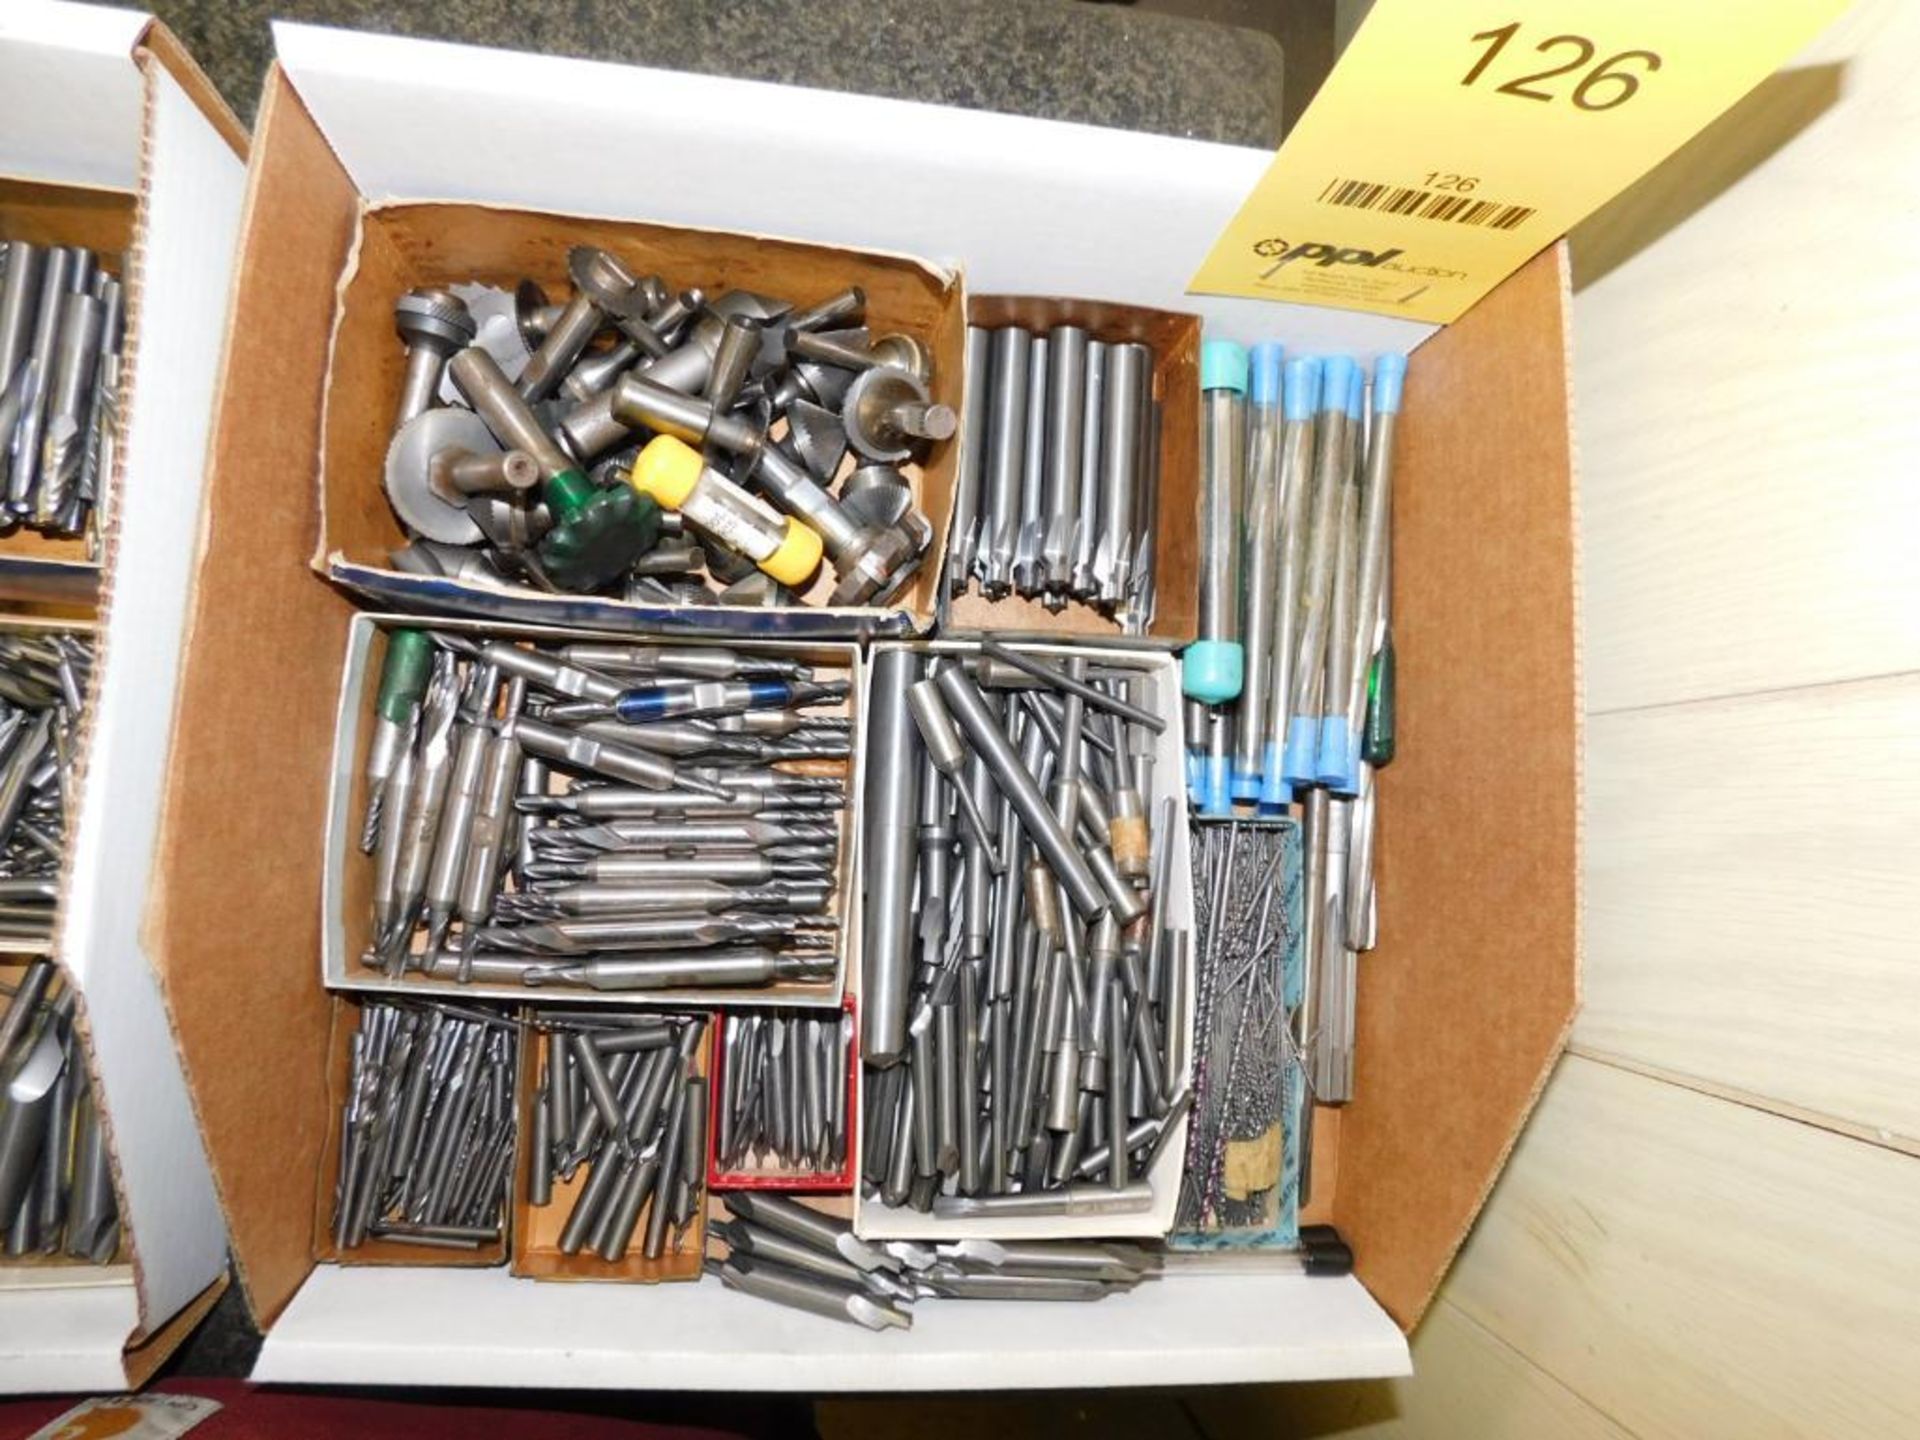 LOT: Assorted Carbide & HSS Tooling, Endmills, Counter Bores, Drill & Countersinks, Drills, Reamers, - Image 2 of 5